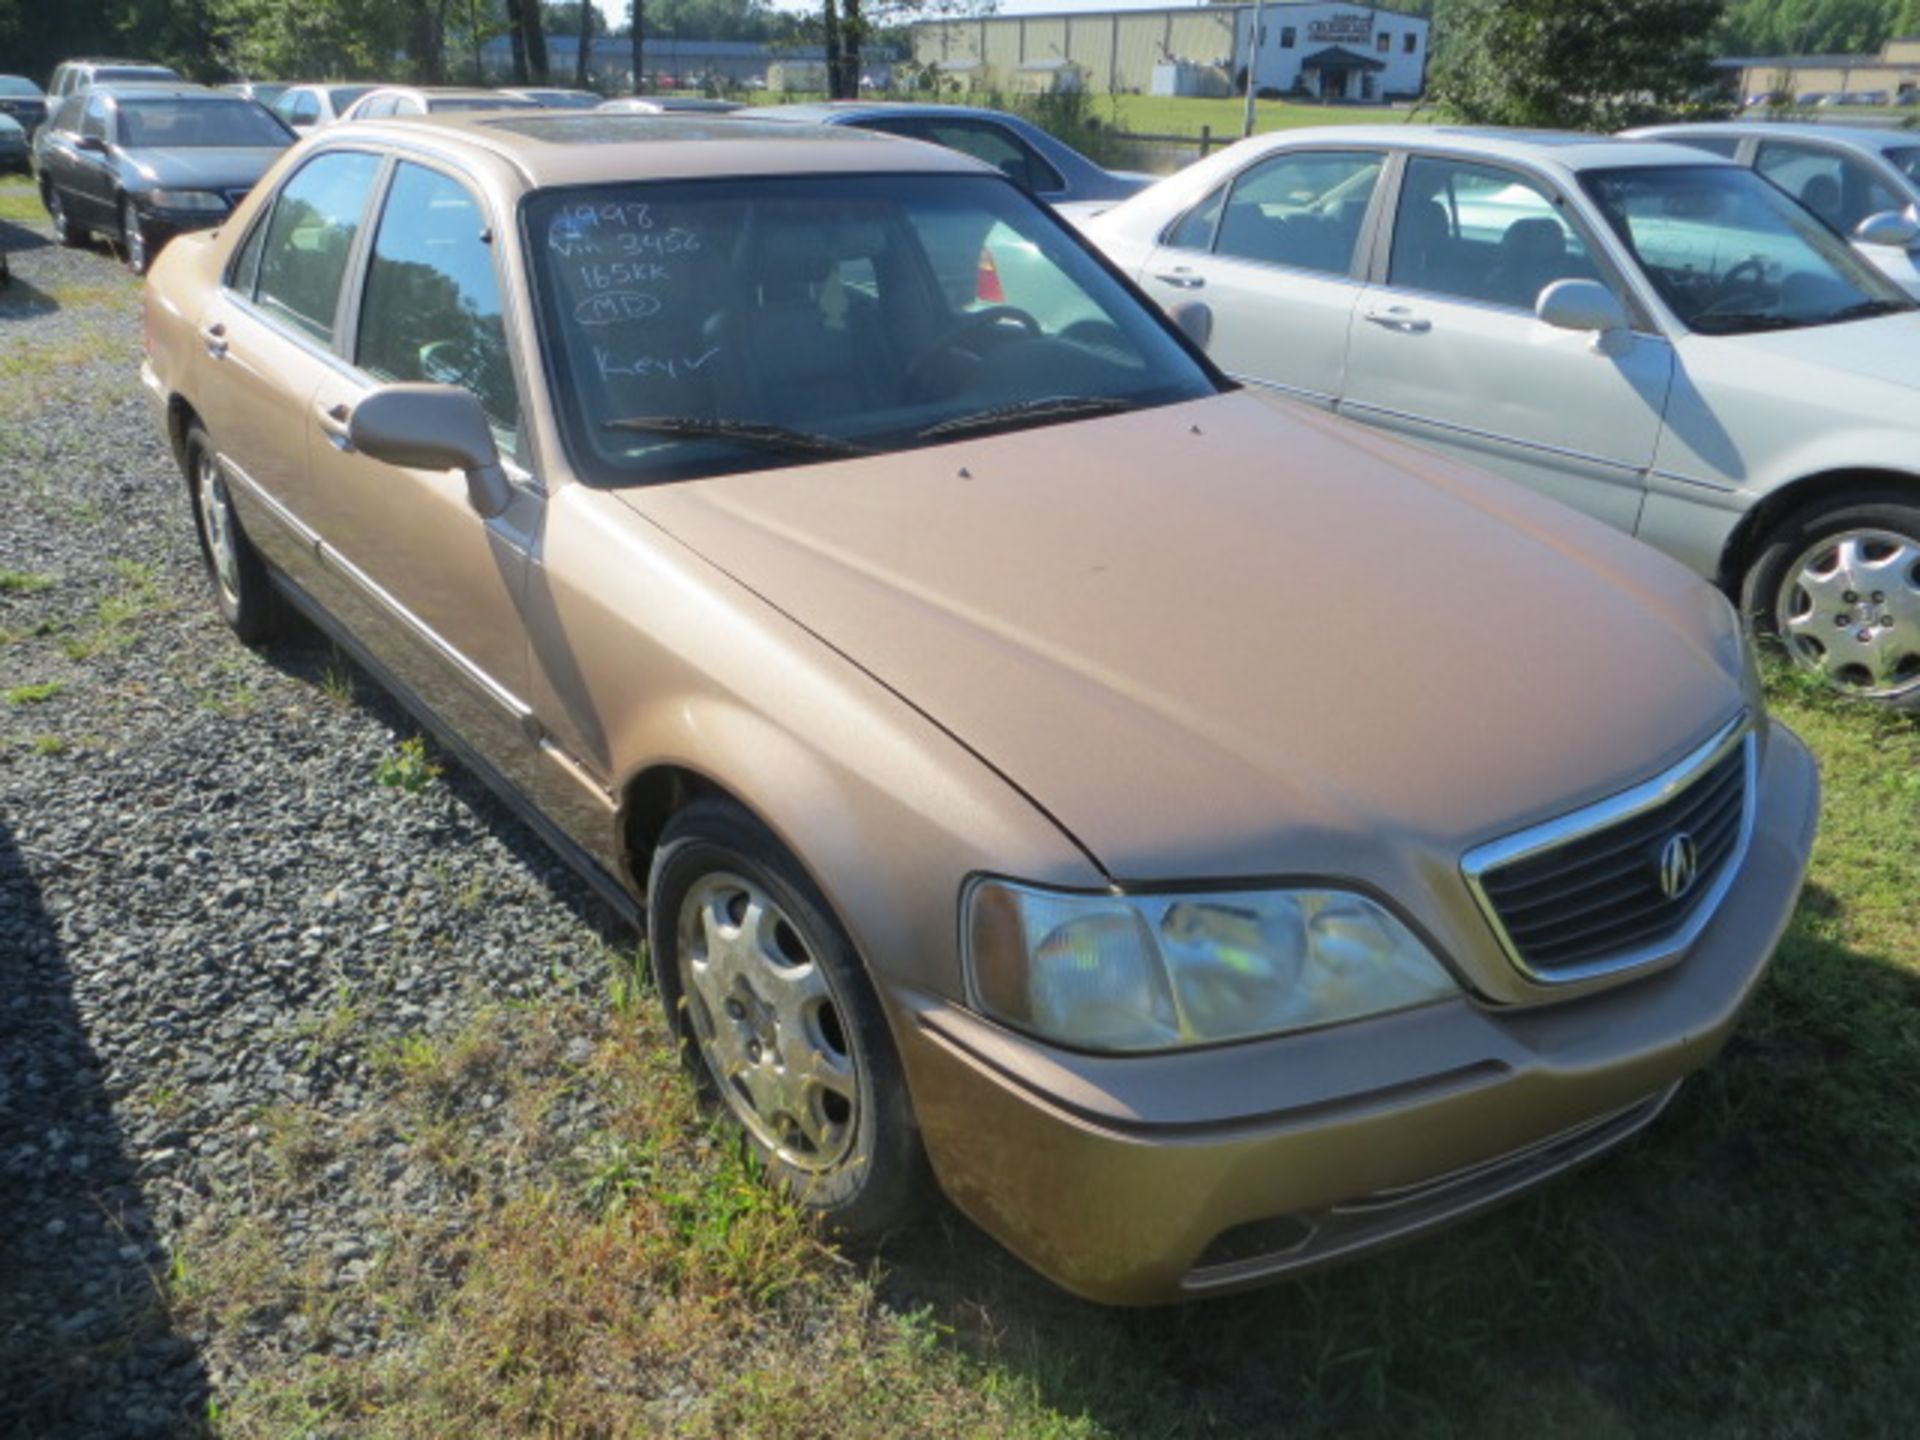 1998 Acura RL 165000 MILES,VIN JH4KA9665XC003456, VEHICLE BEING SOLD WITH SALVAGE TITLE AND 30 DAY